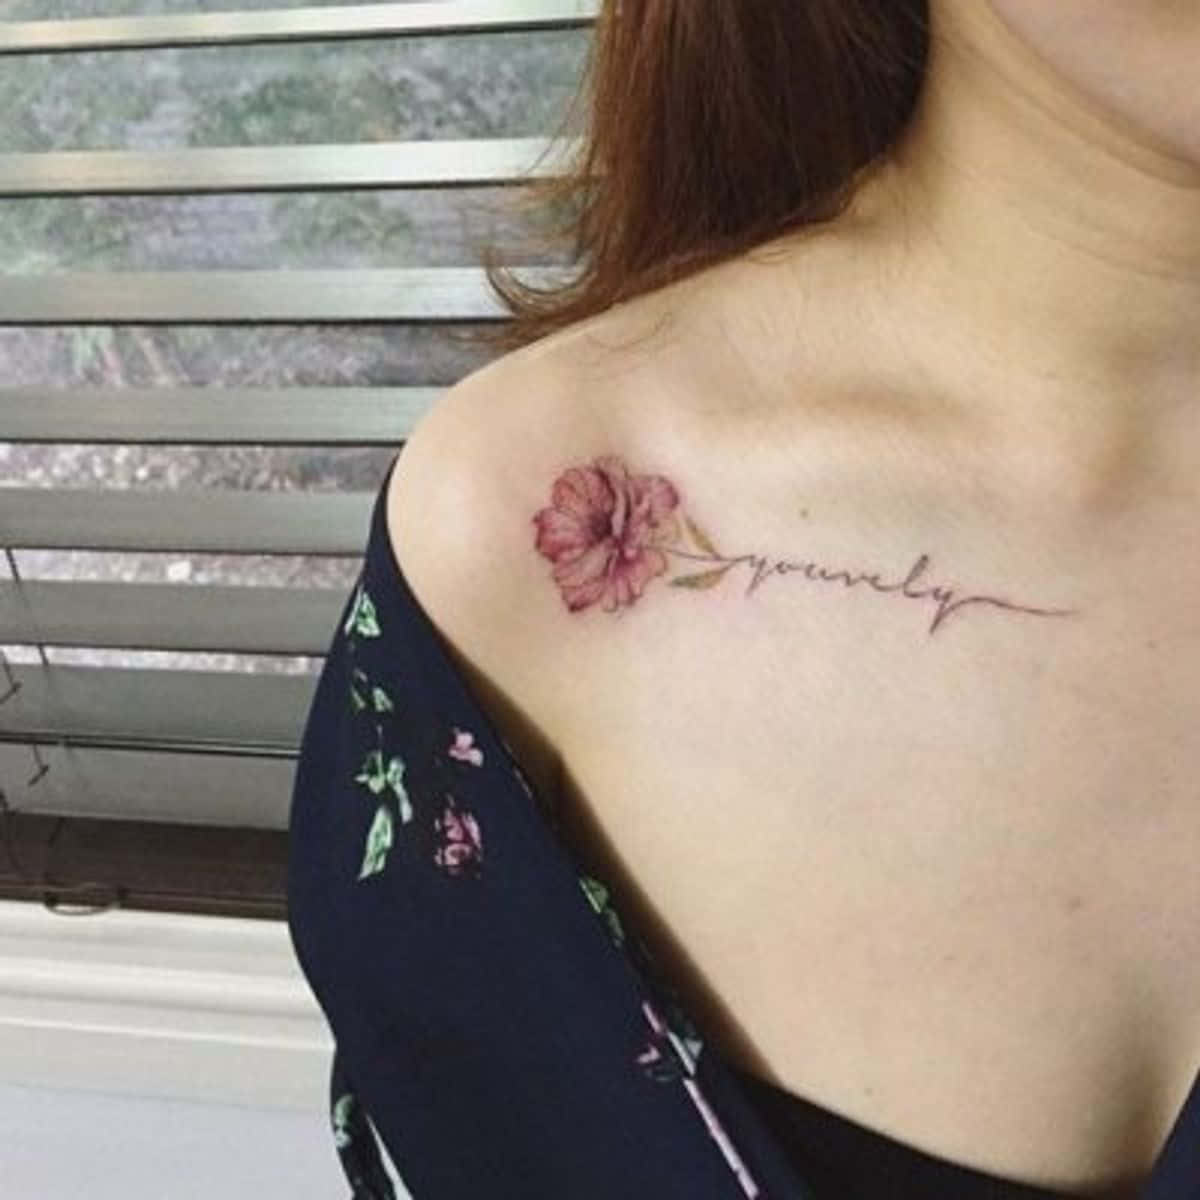 Download Art of Expression: A Unique Tattoo on a Girl's Shoulder |  Wallpapers.com